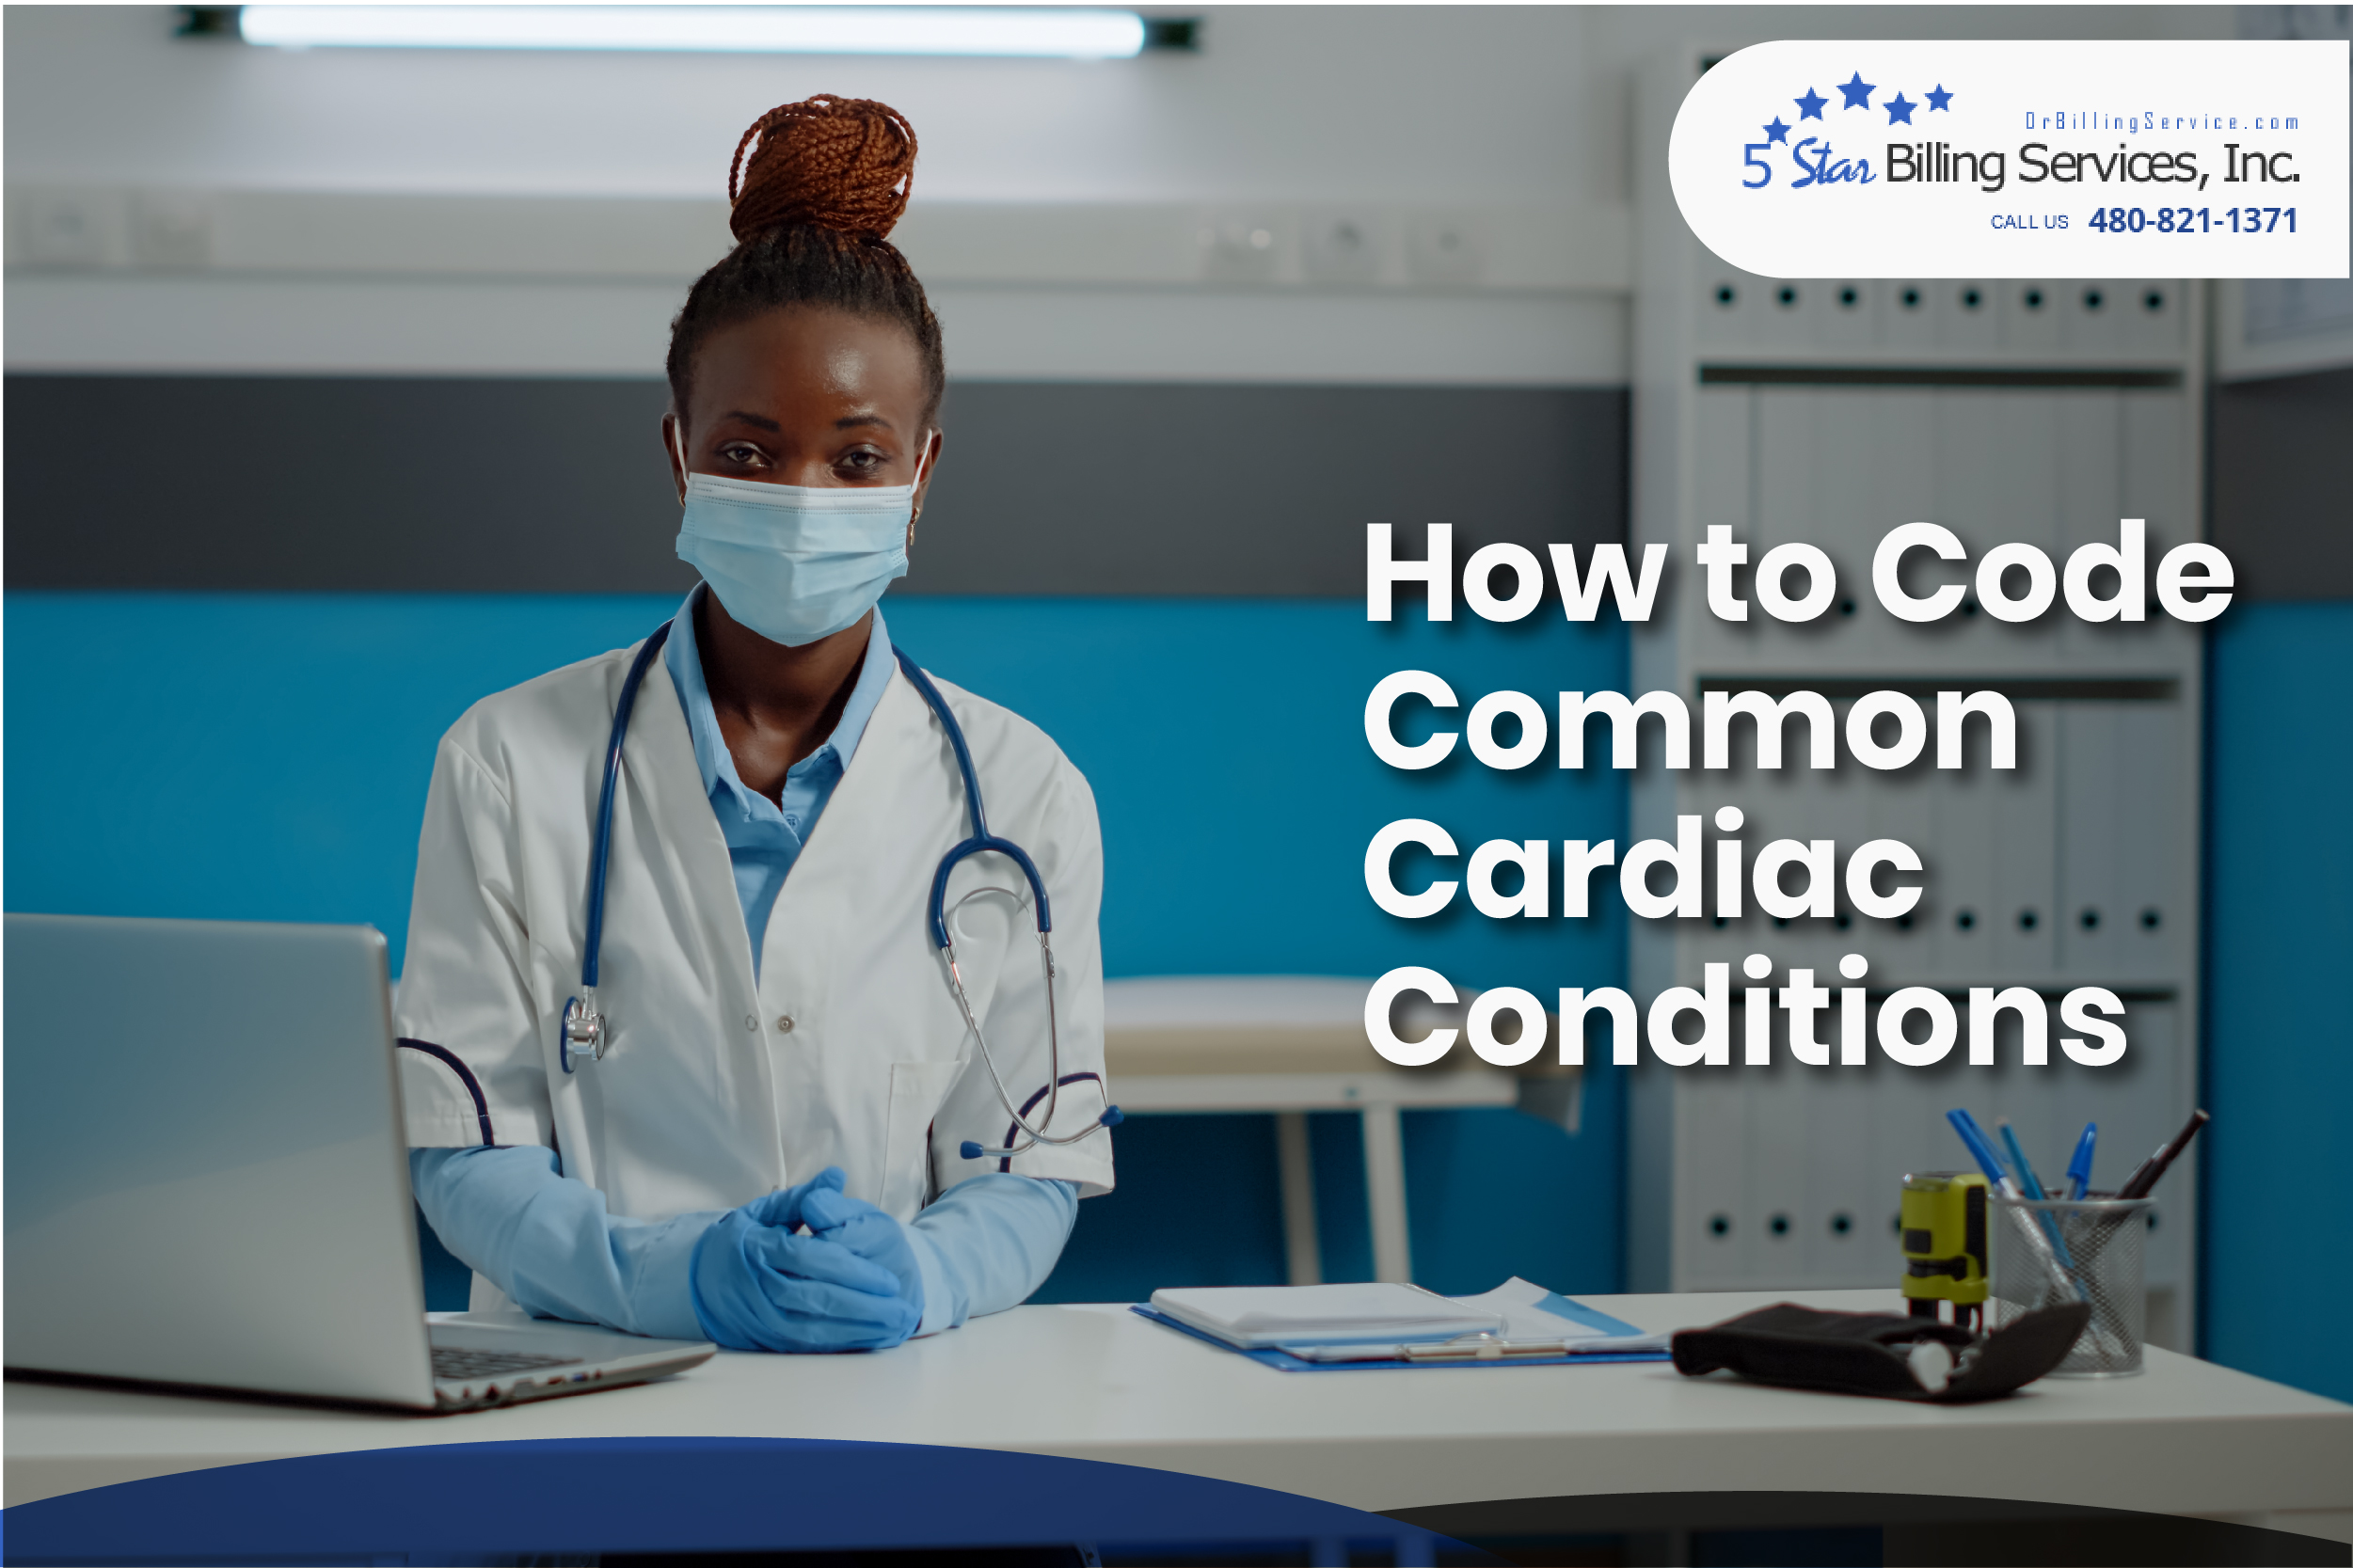 How to Code Common Cardiac Conditions